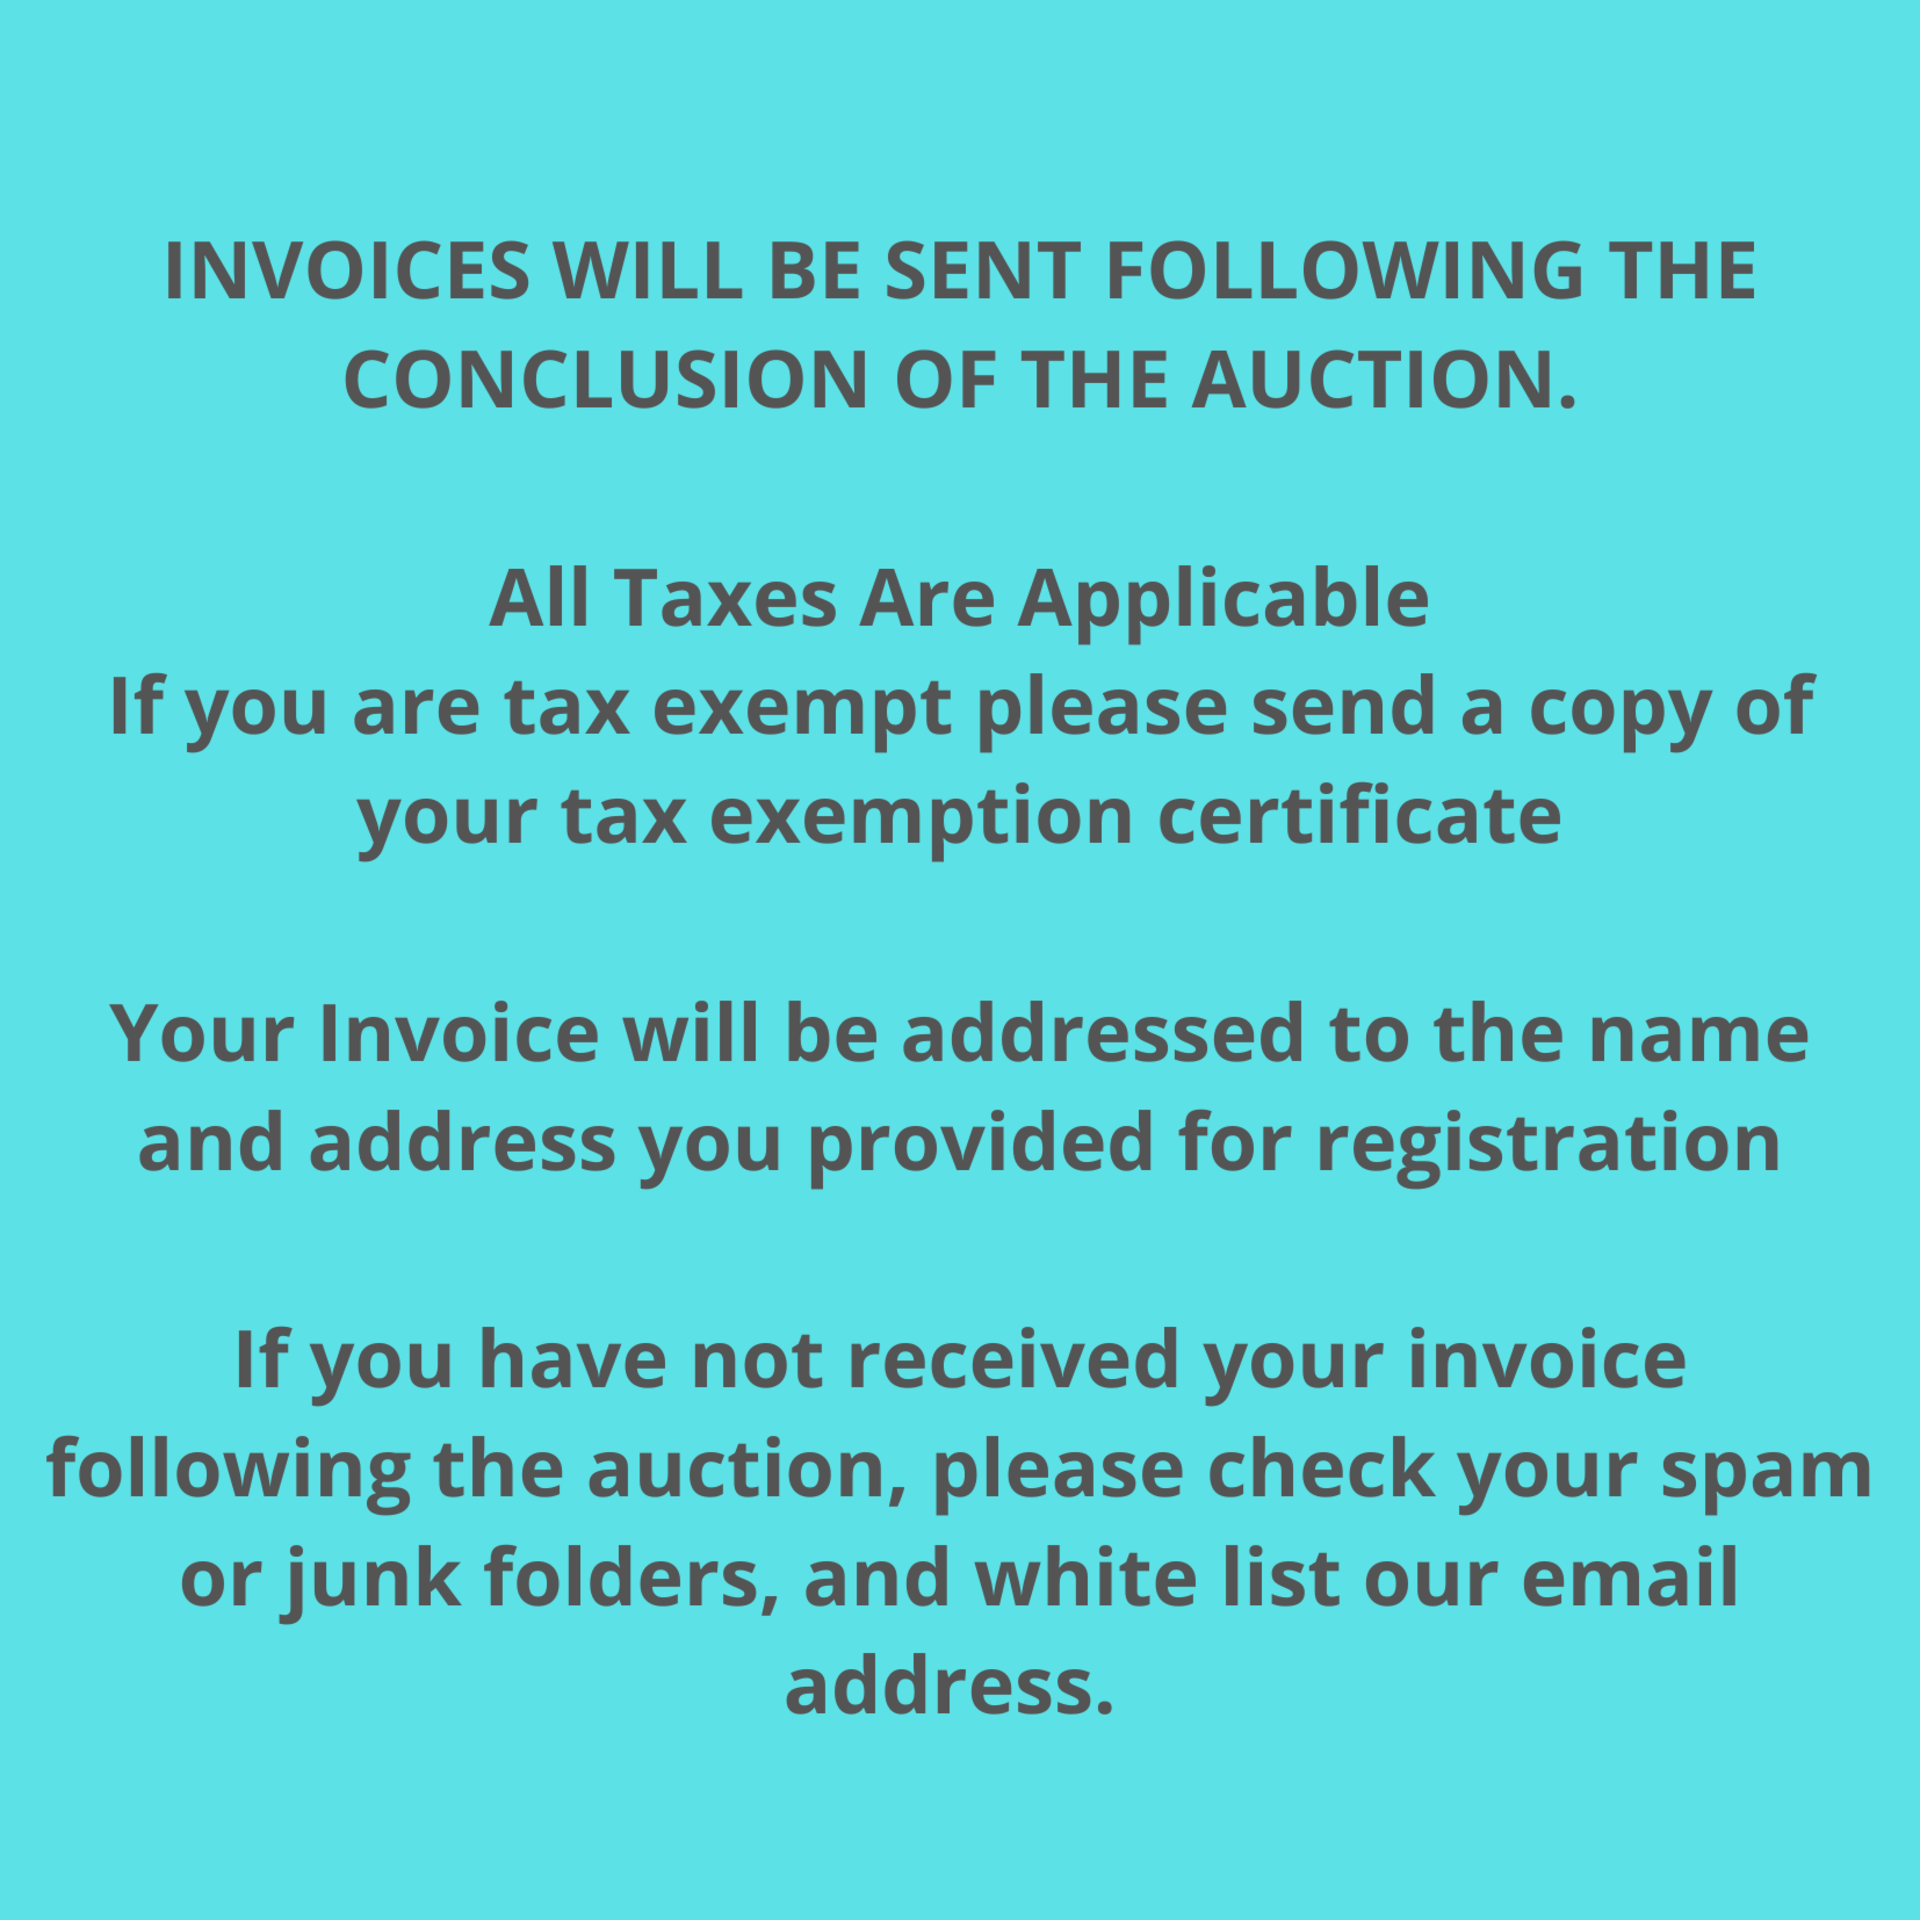 Invoices will be sent following the auction